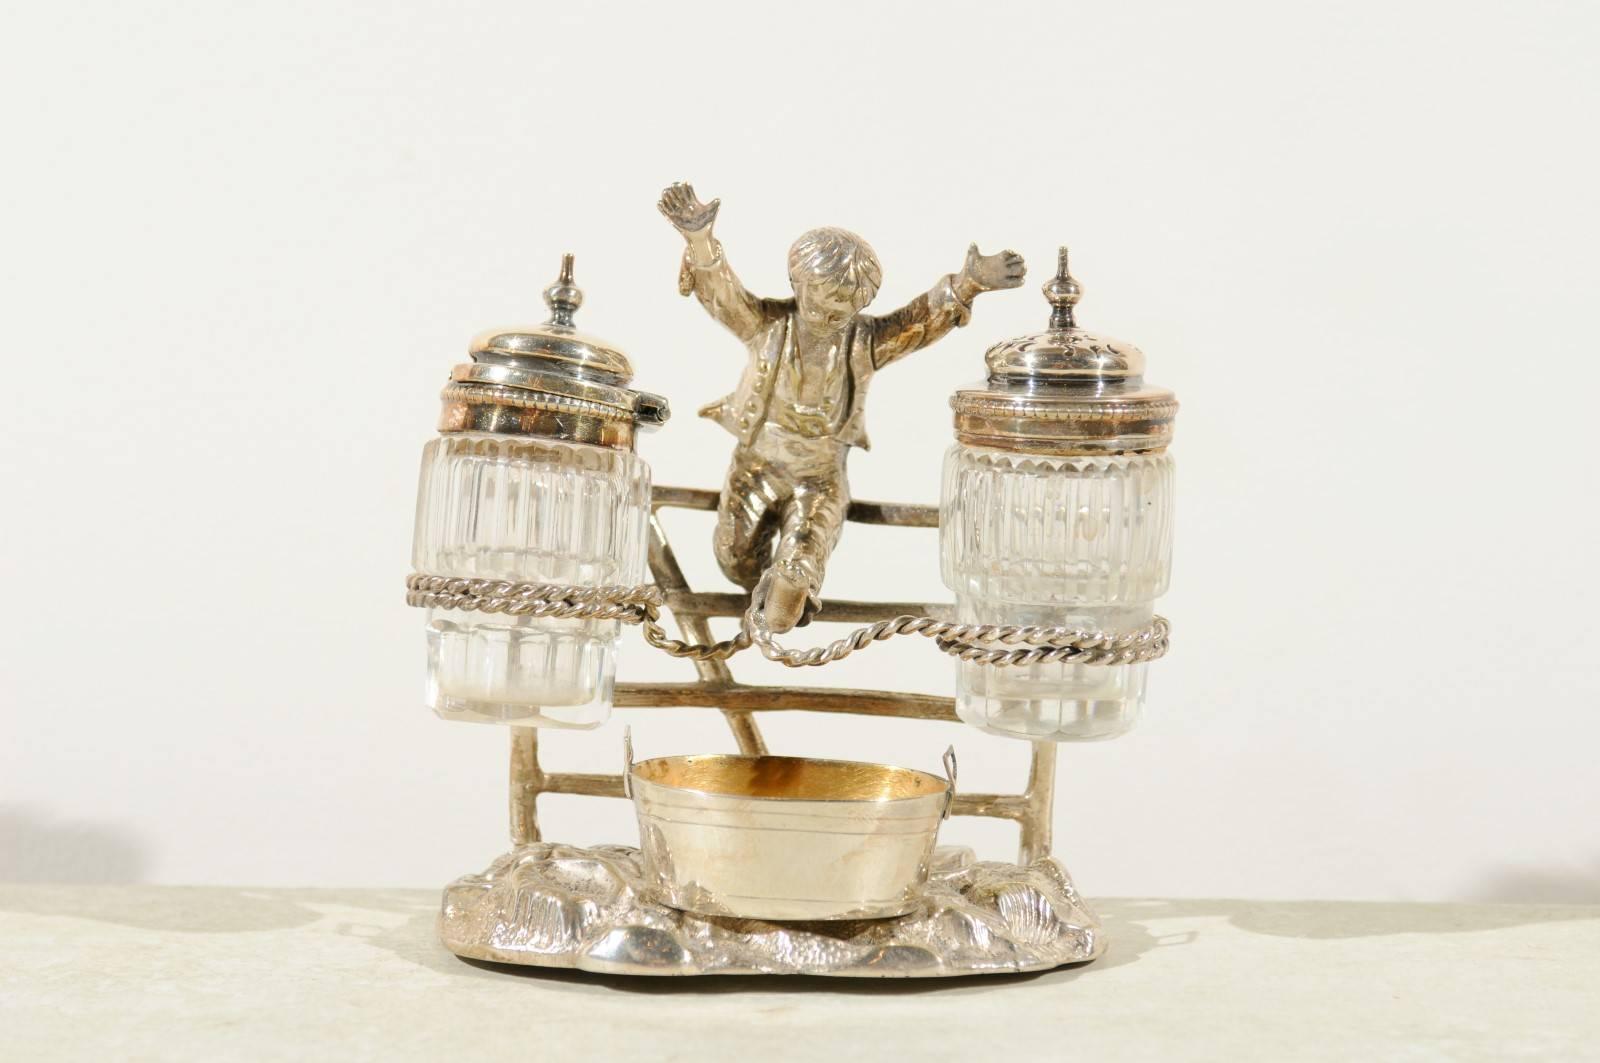 An English figurative silver plated cruet set, registered 1873 with young boy joyously jumping for joy. This charming late 19th century silver cruet set features an elegantly dressed young boy, his arms extended forward, caught in a mid-air jump, in